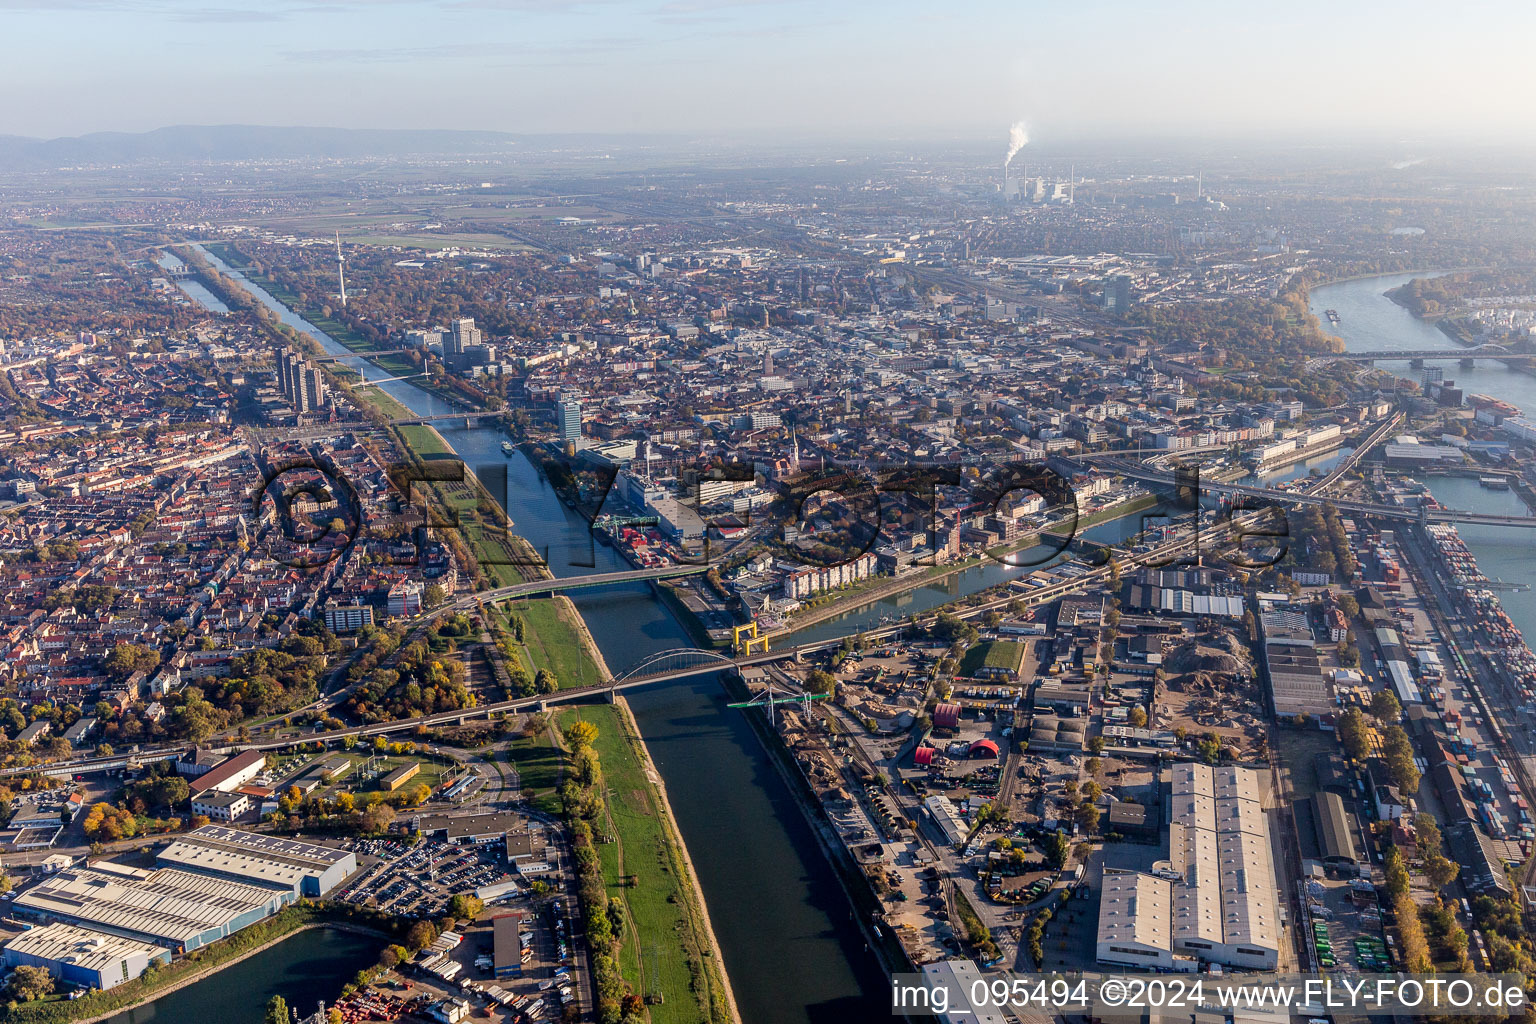 Port Muehlauhafen facilities on the banks between the river courses of the Neckar and Rhine in the district Jungbusch in Mannheim in the state Baden-Wurttemberg, Germany